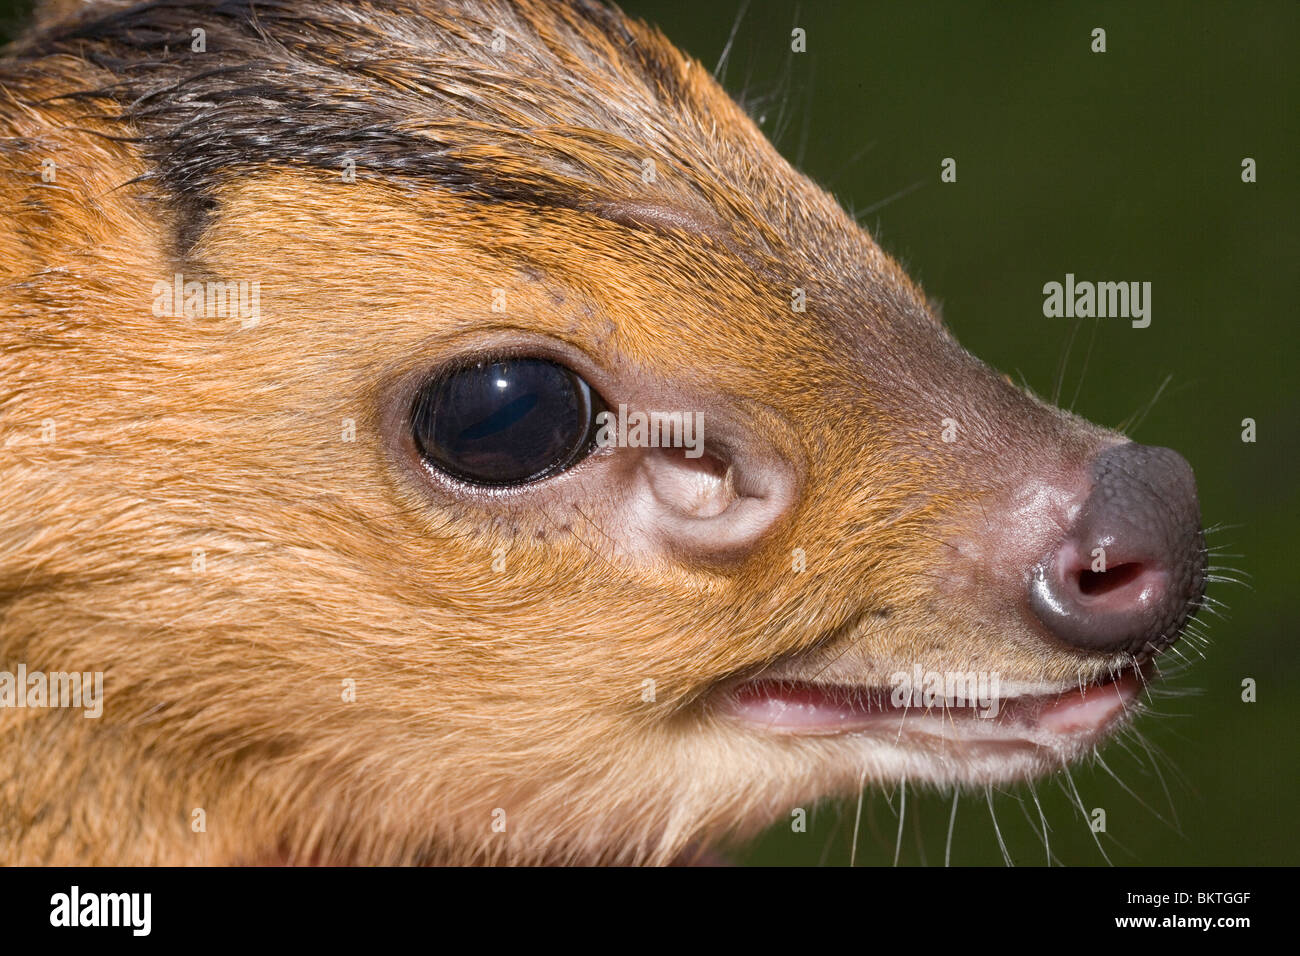 Muntjac Deer (Muntiacus reevesi). Fawn, showing dilation of pre-orbital facial gland. An expression of fear. Stock Photo